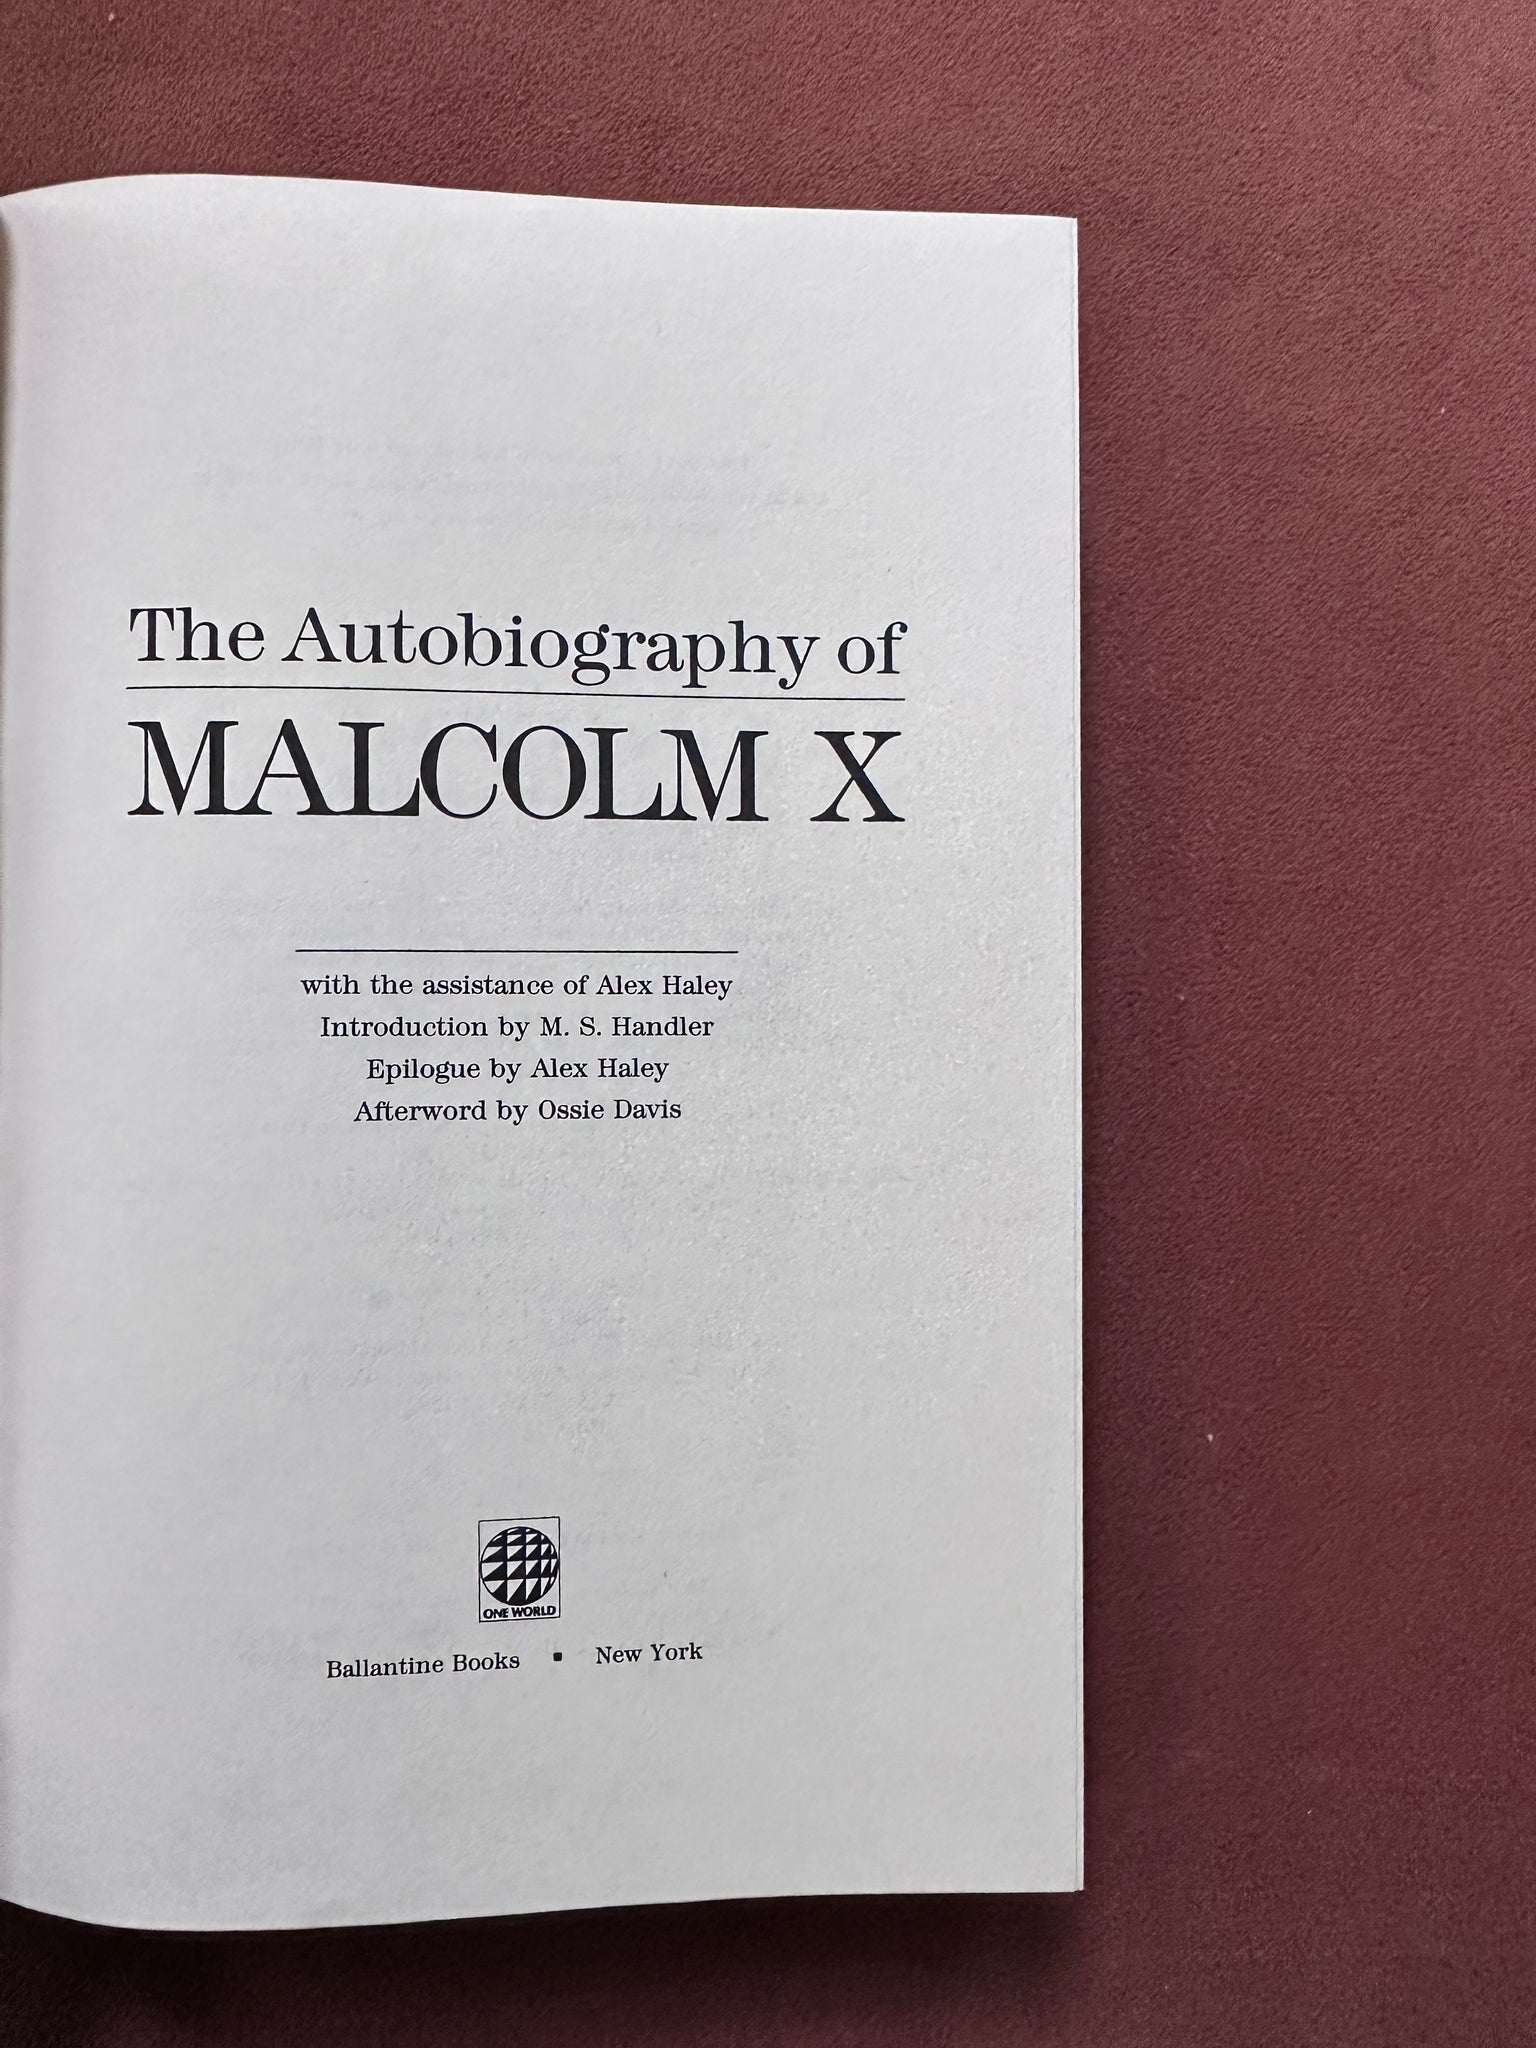 Vintage Hardcover “The Autobiography of Malcolm X” (1992)